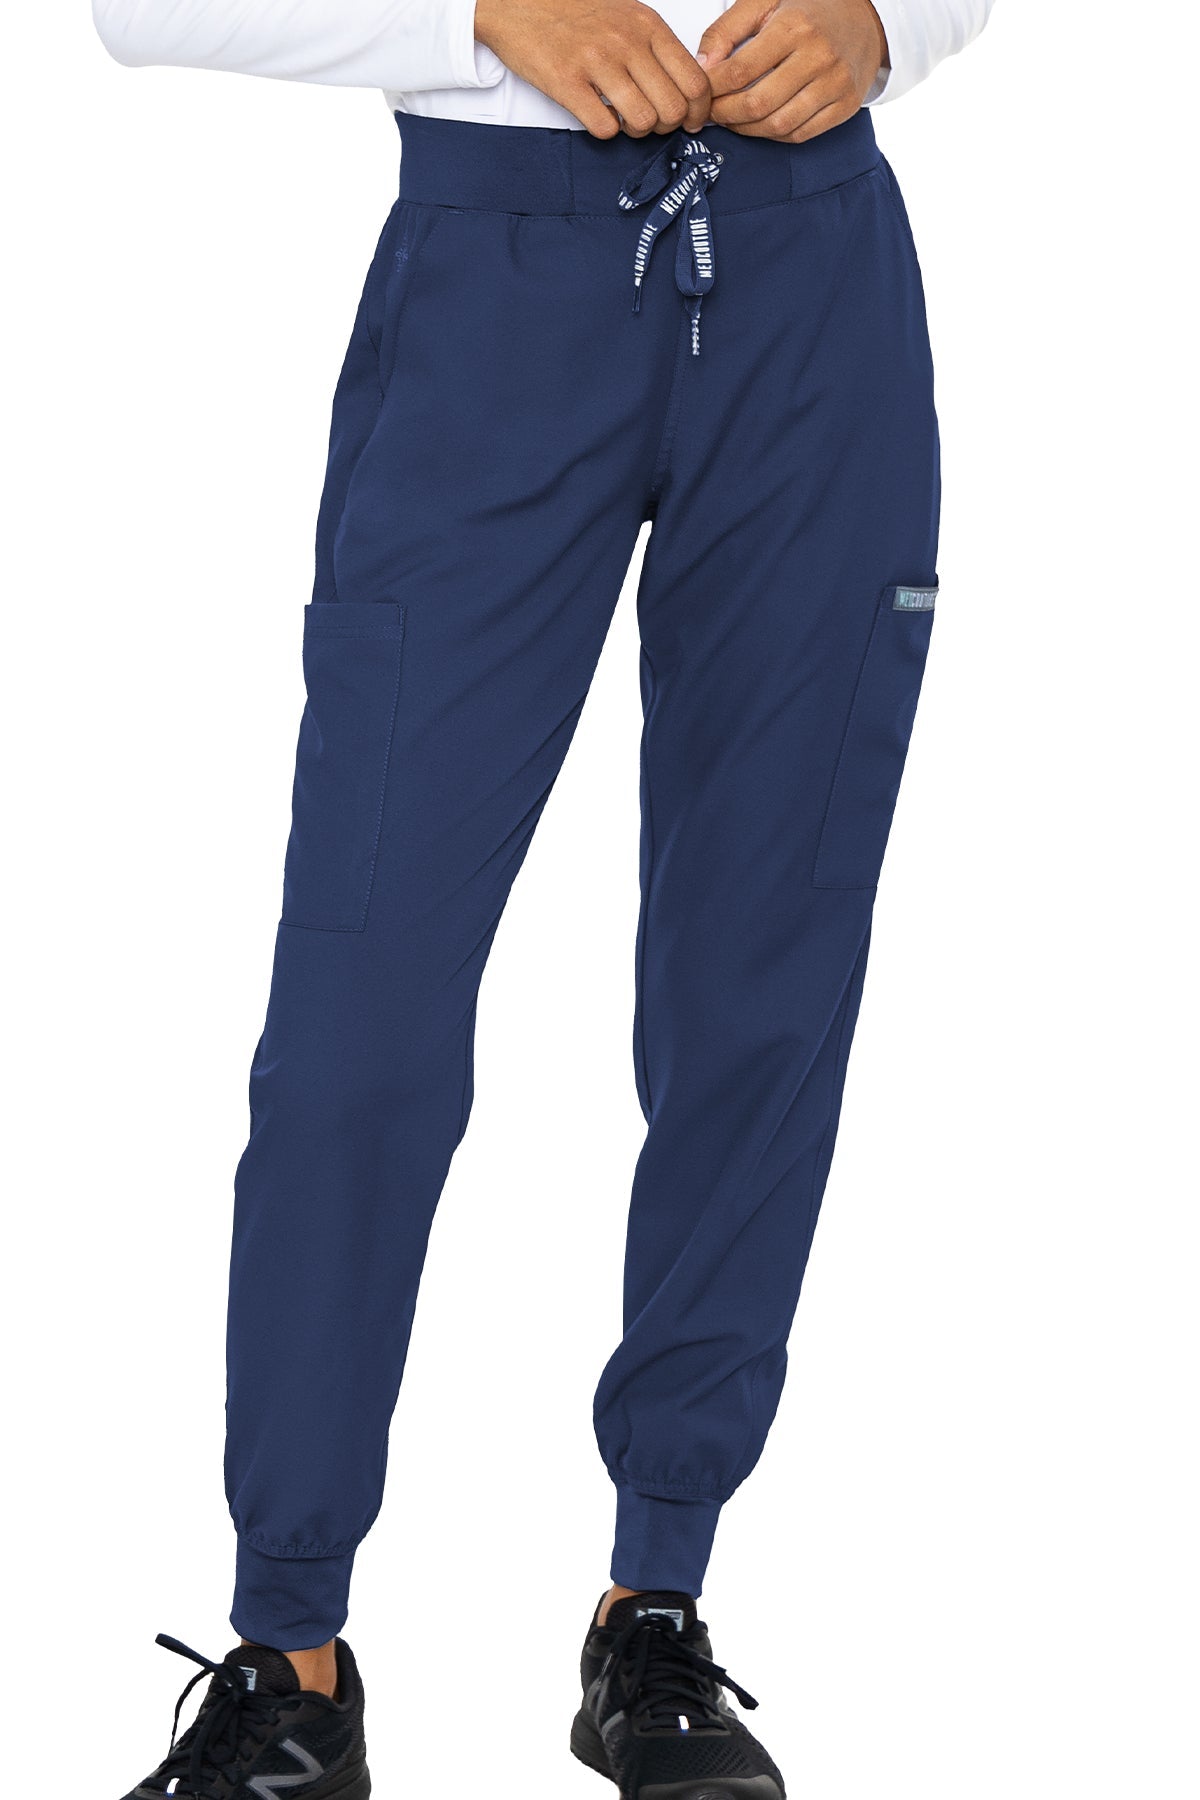 MED COUTURE Insight Jogger